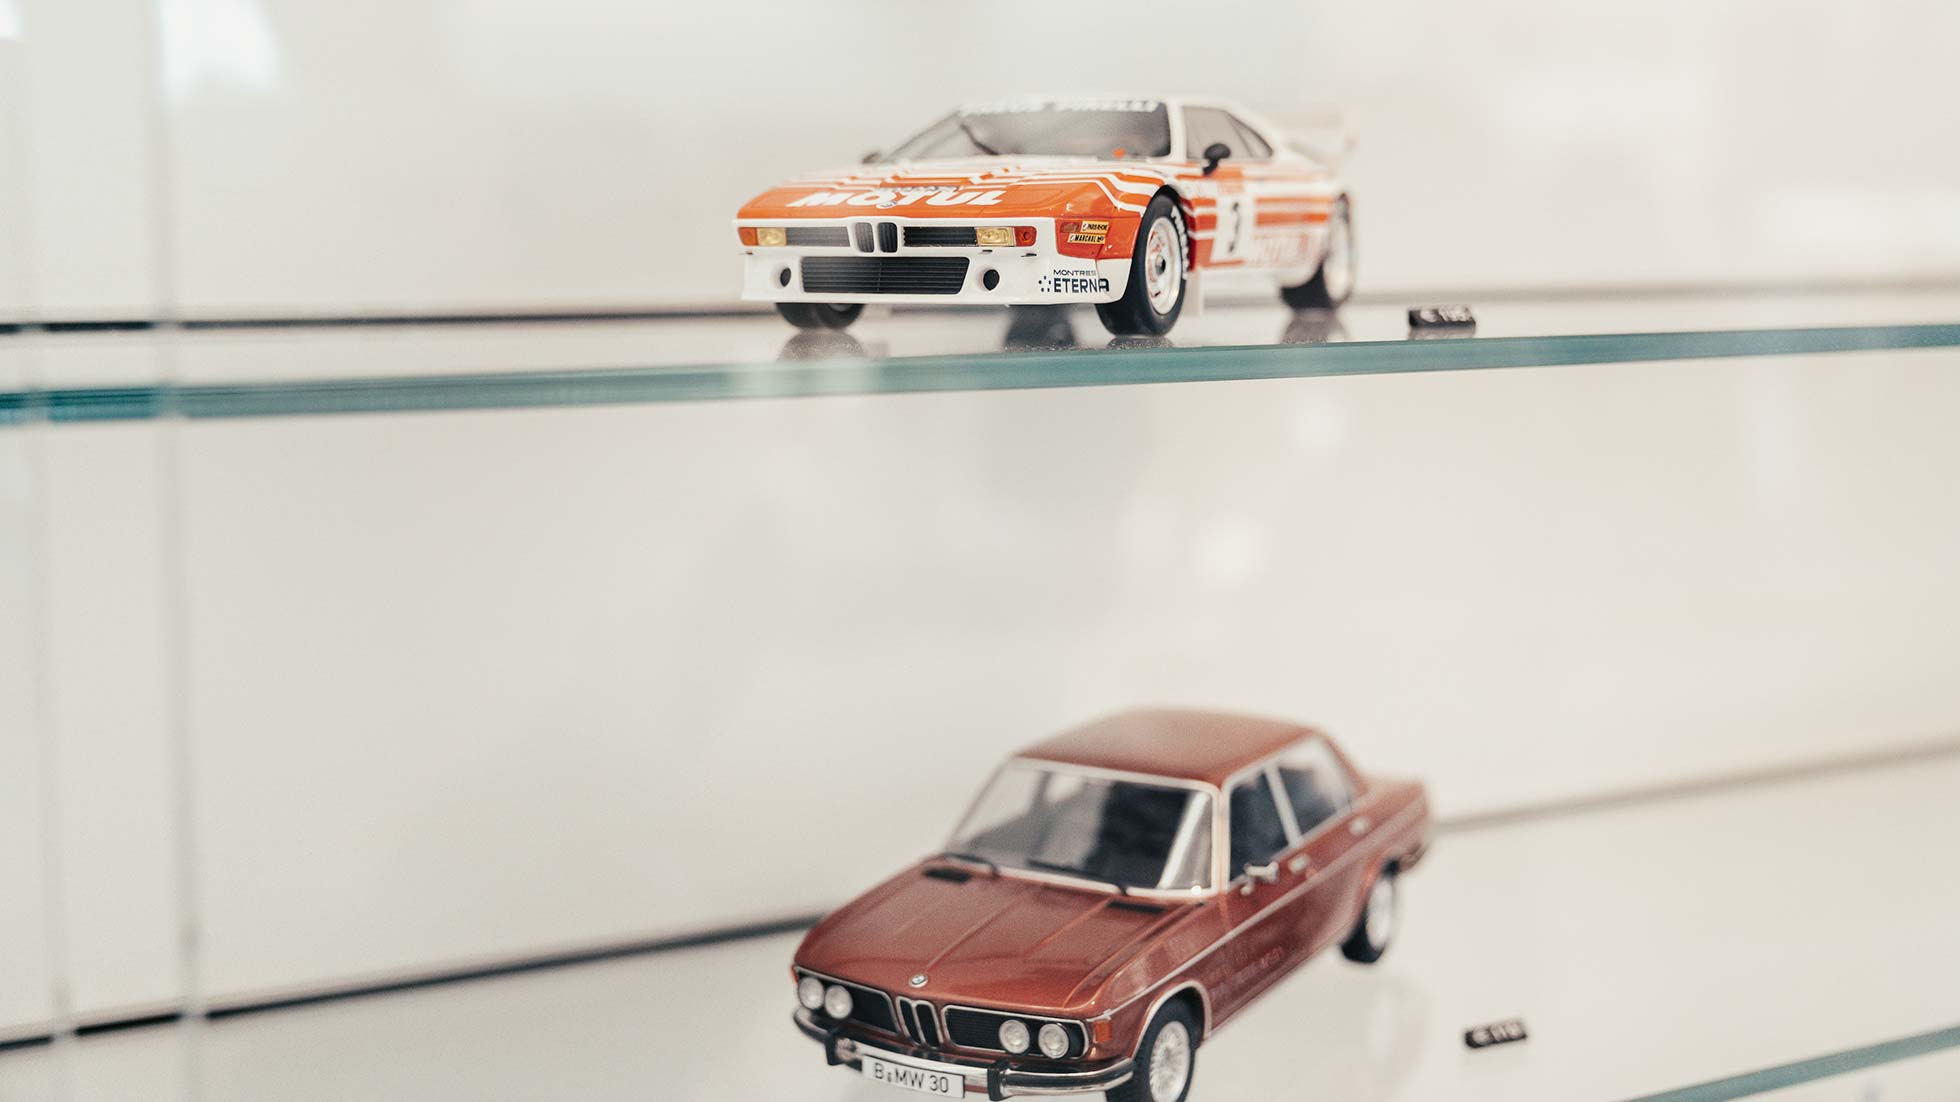 SHOPS IN BMW WELT AND BMW MUSEUM FOR LIFERSTYLE AND ACCESSOIRES